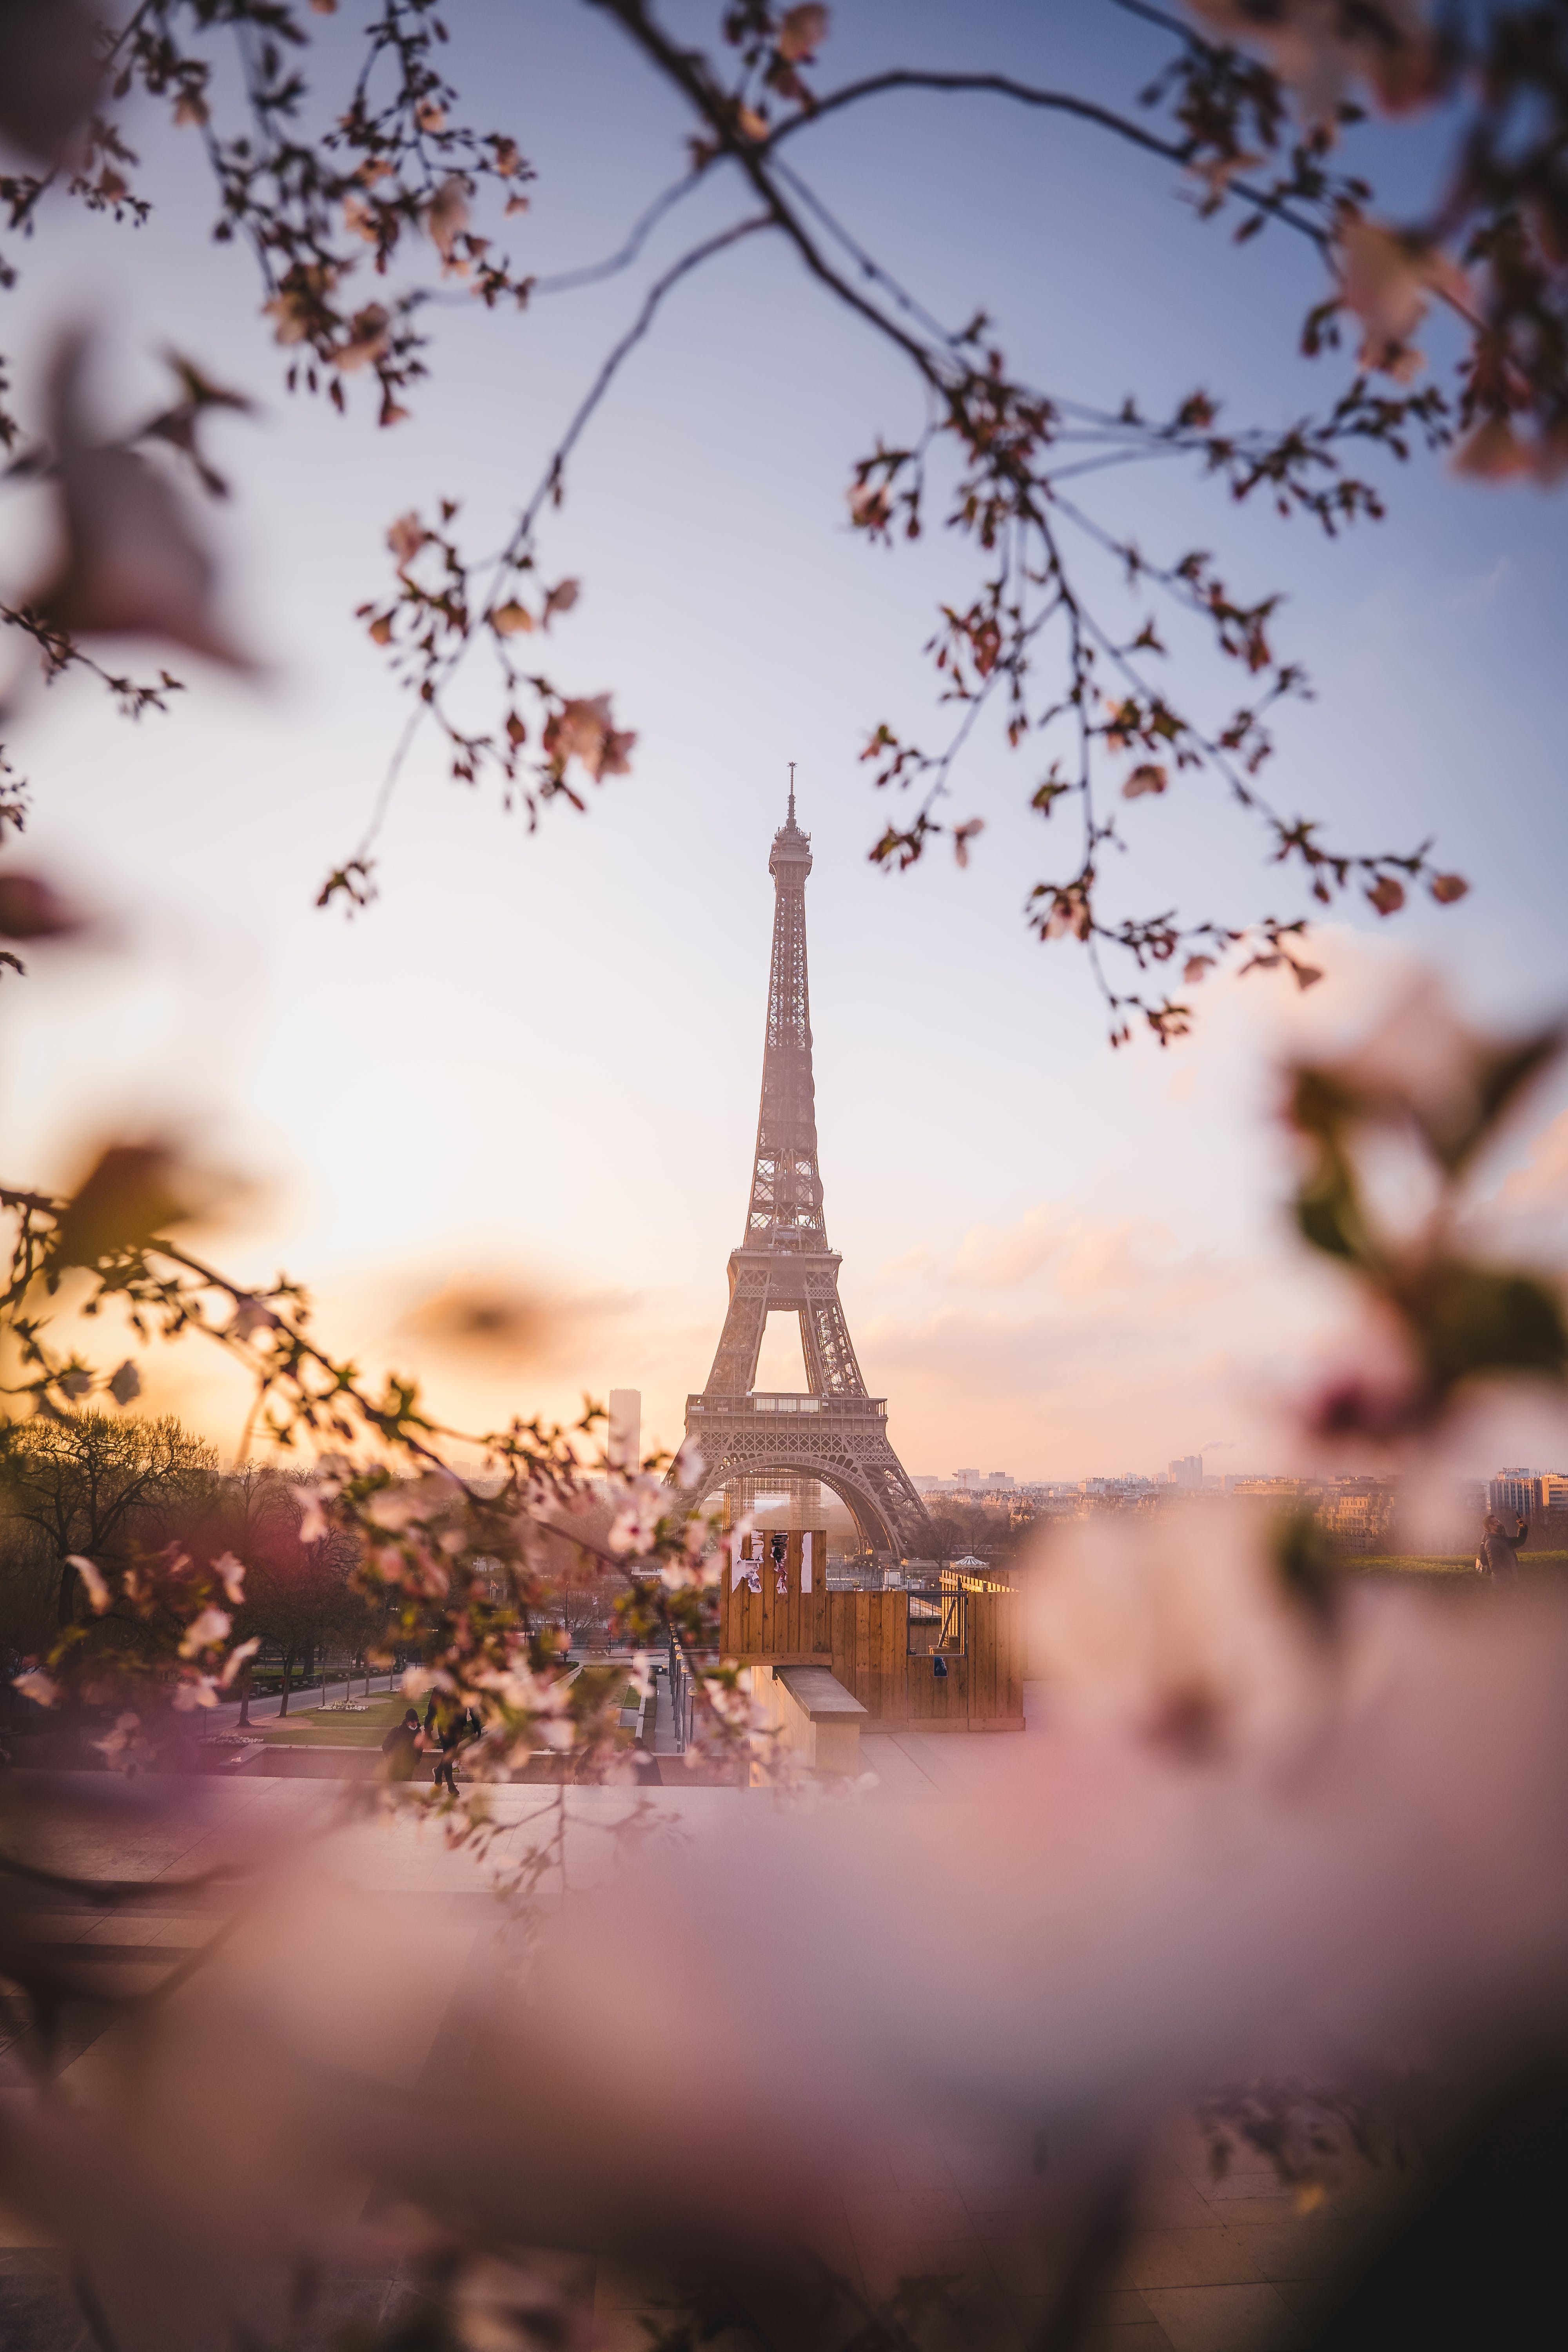 A photo of the Eiffel Tower with pink flowers in the foreground. - Eiffel Tower